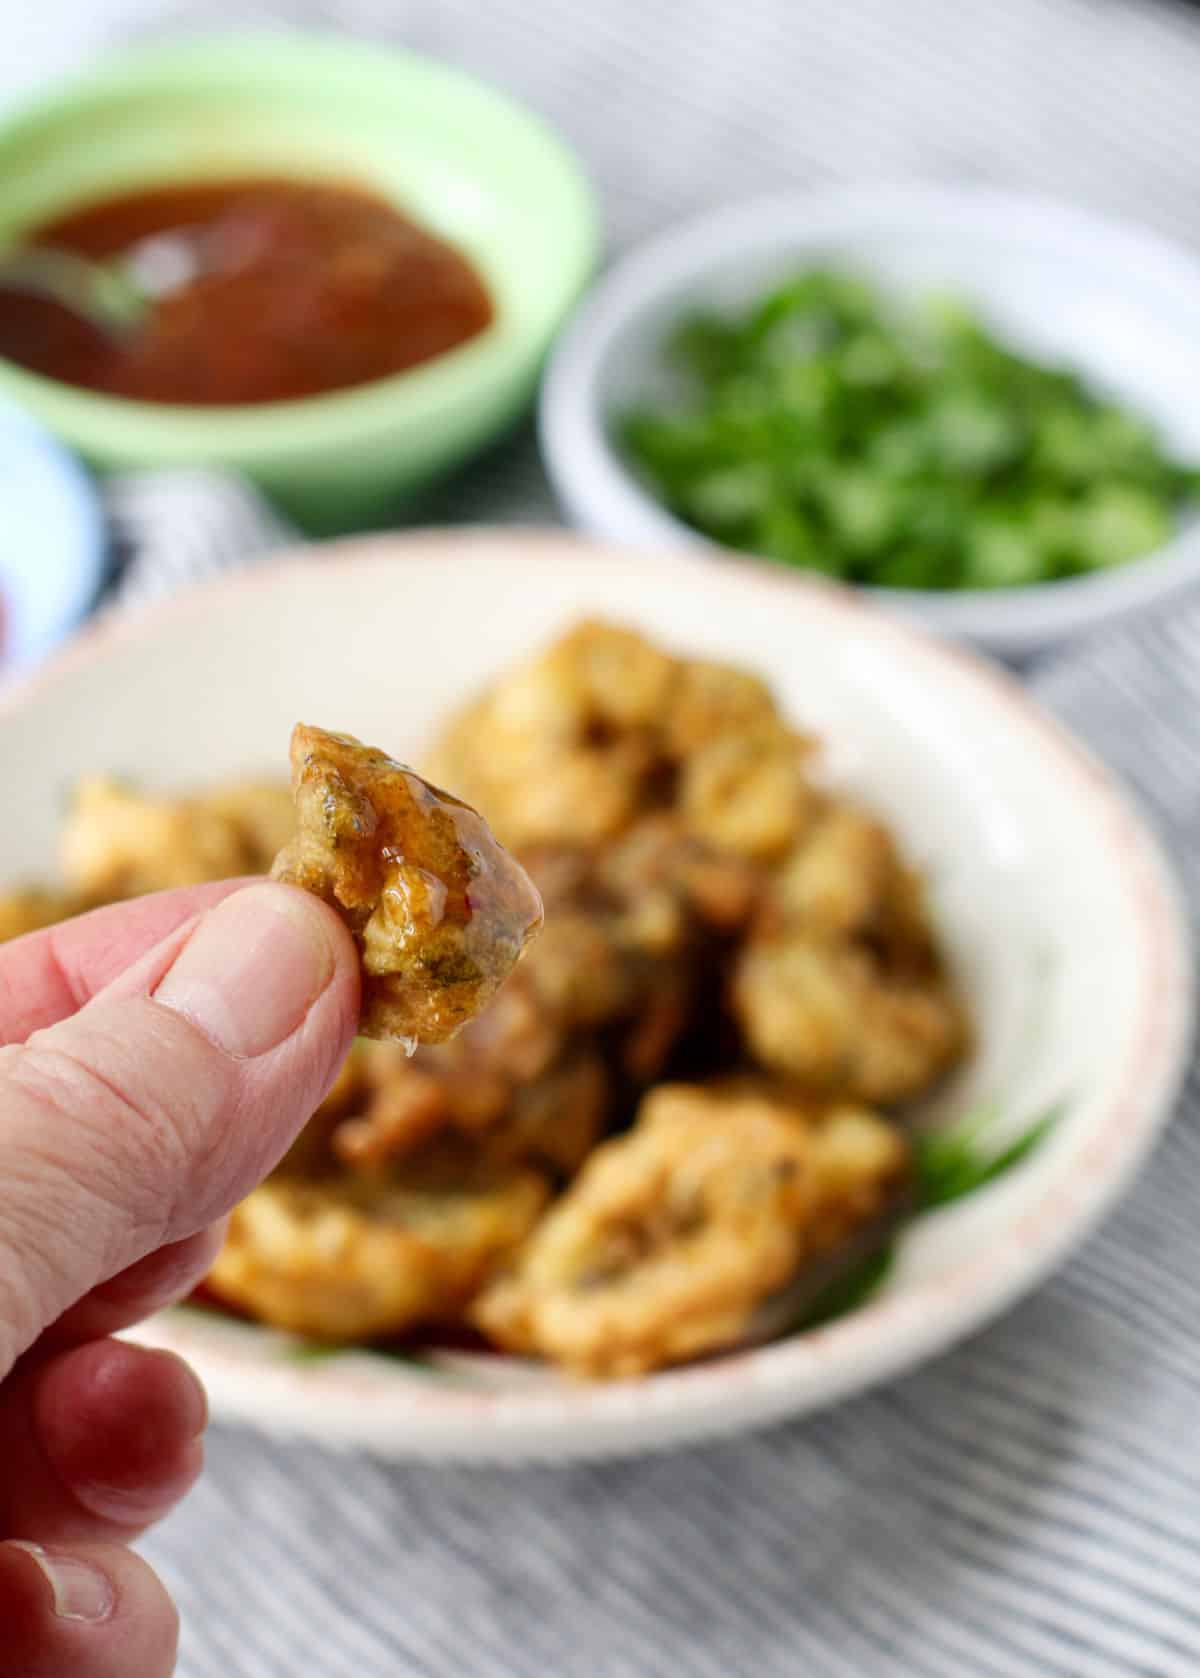 Salt and pepper squid bite dipped in a sweet sauce.